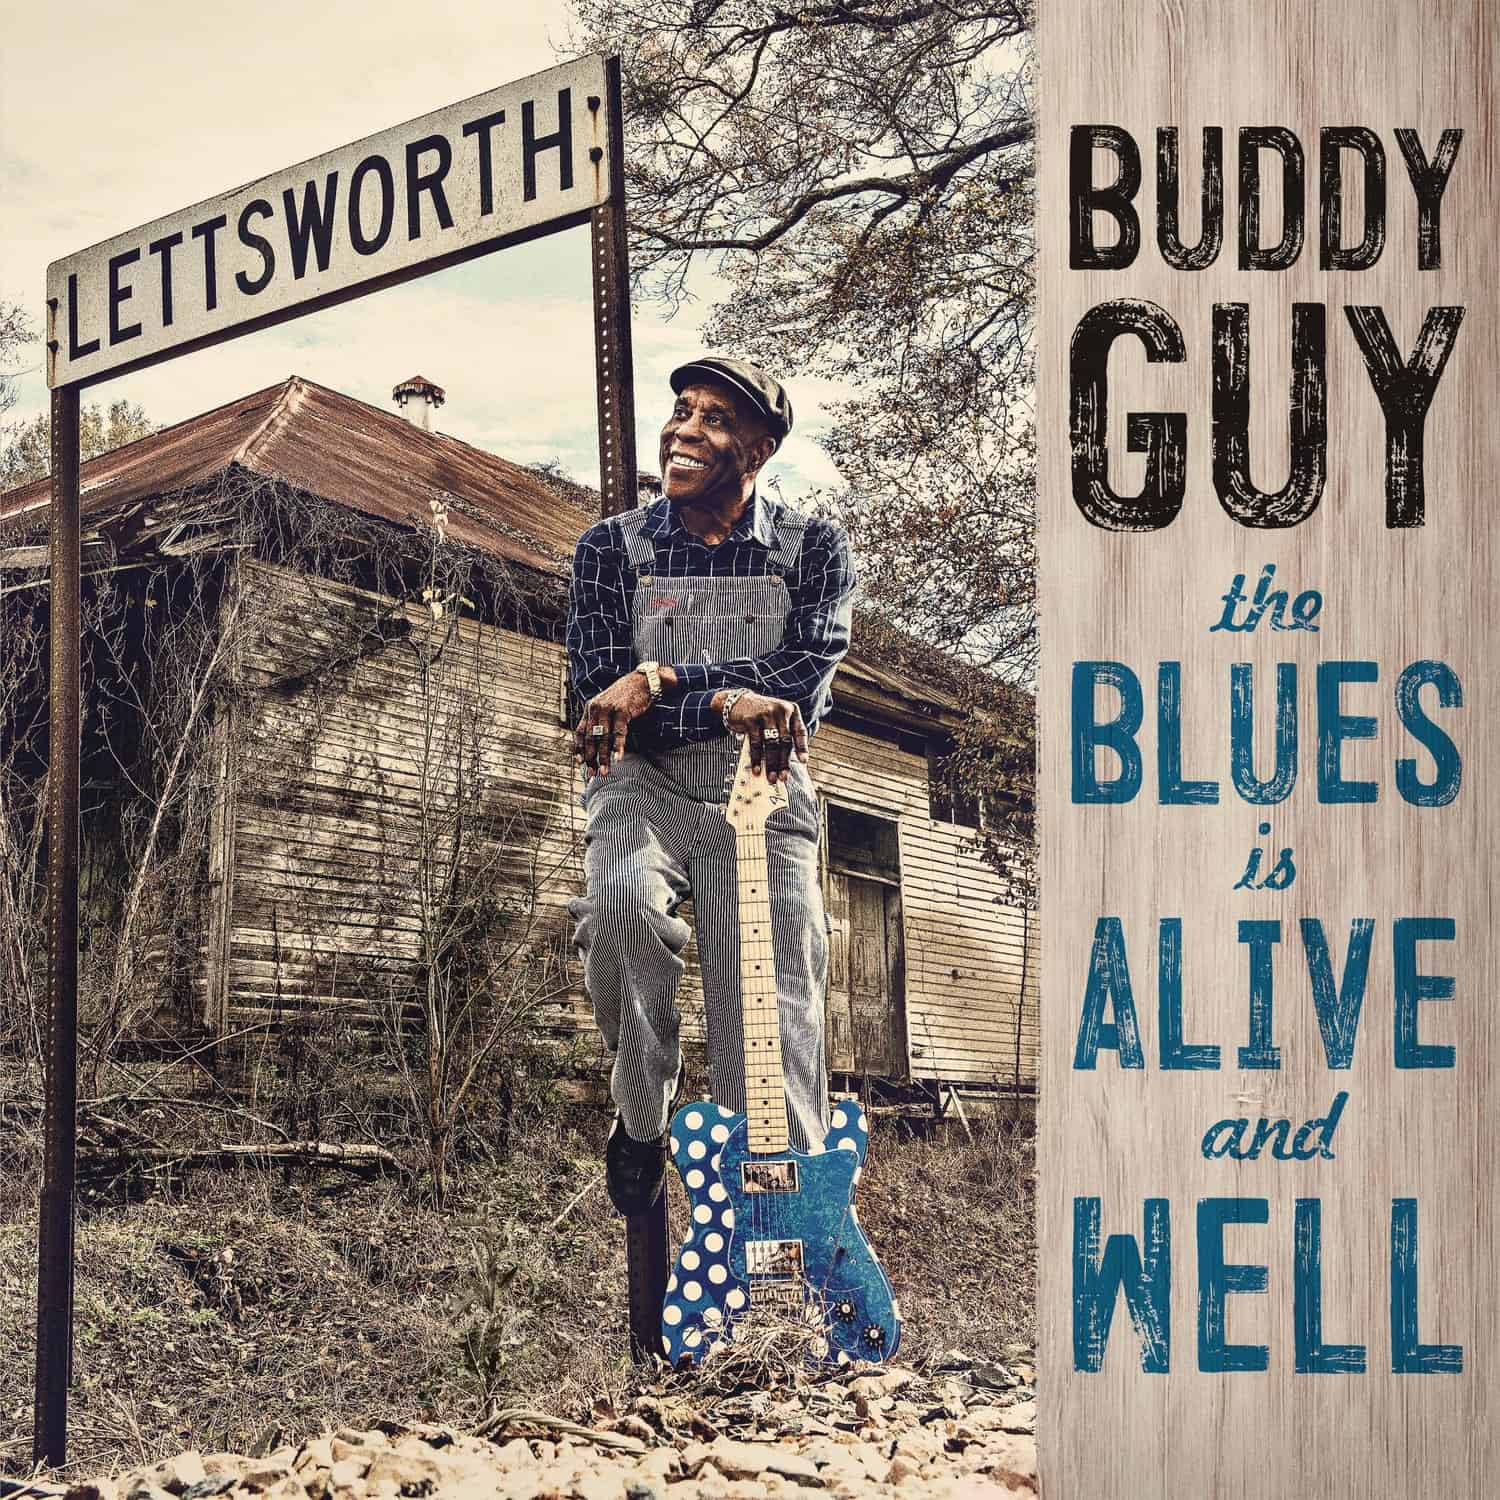 Buddy-Guy-The-Blues-Is-Alive-And-Well-vinyl-record-album1